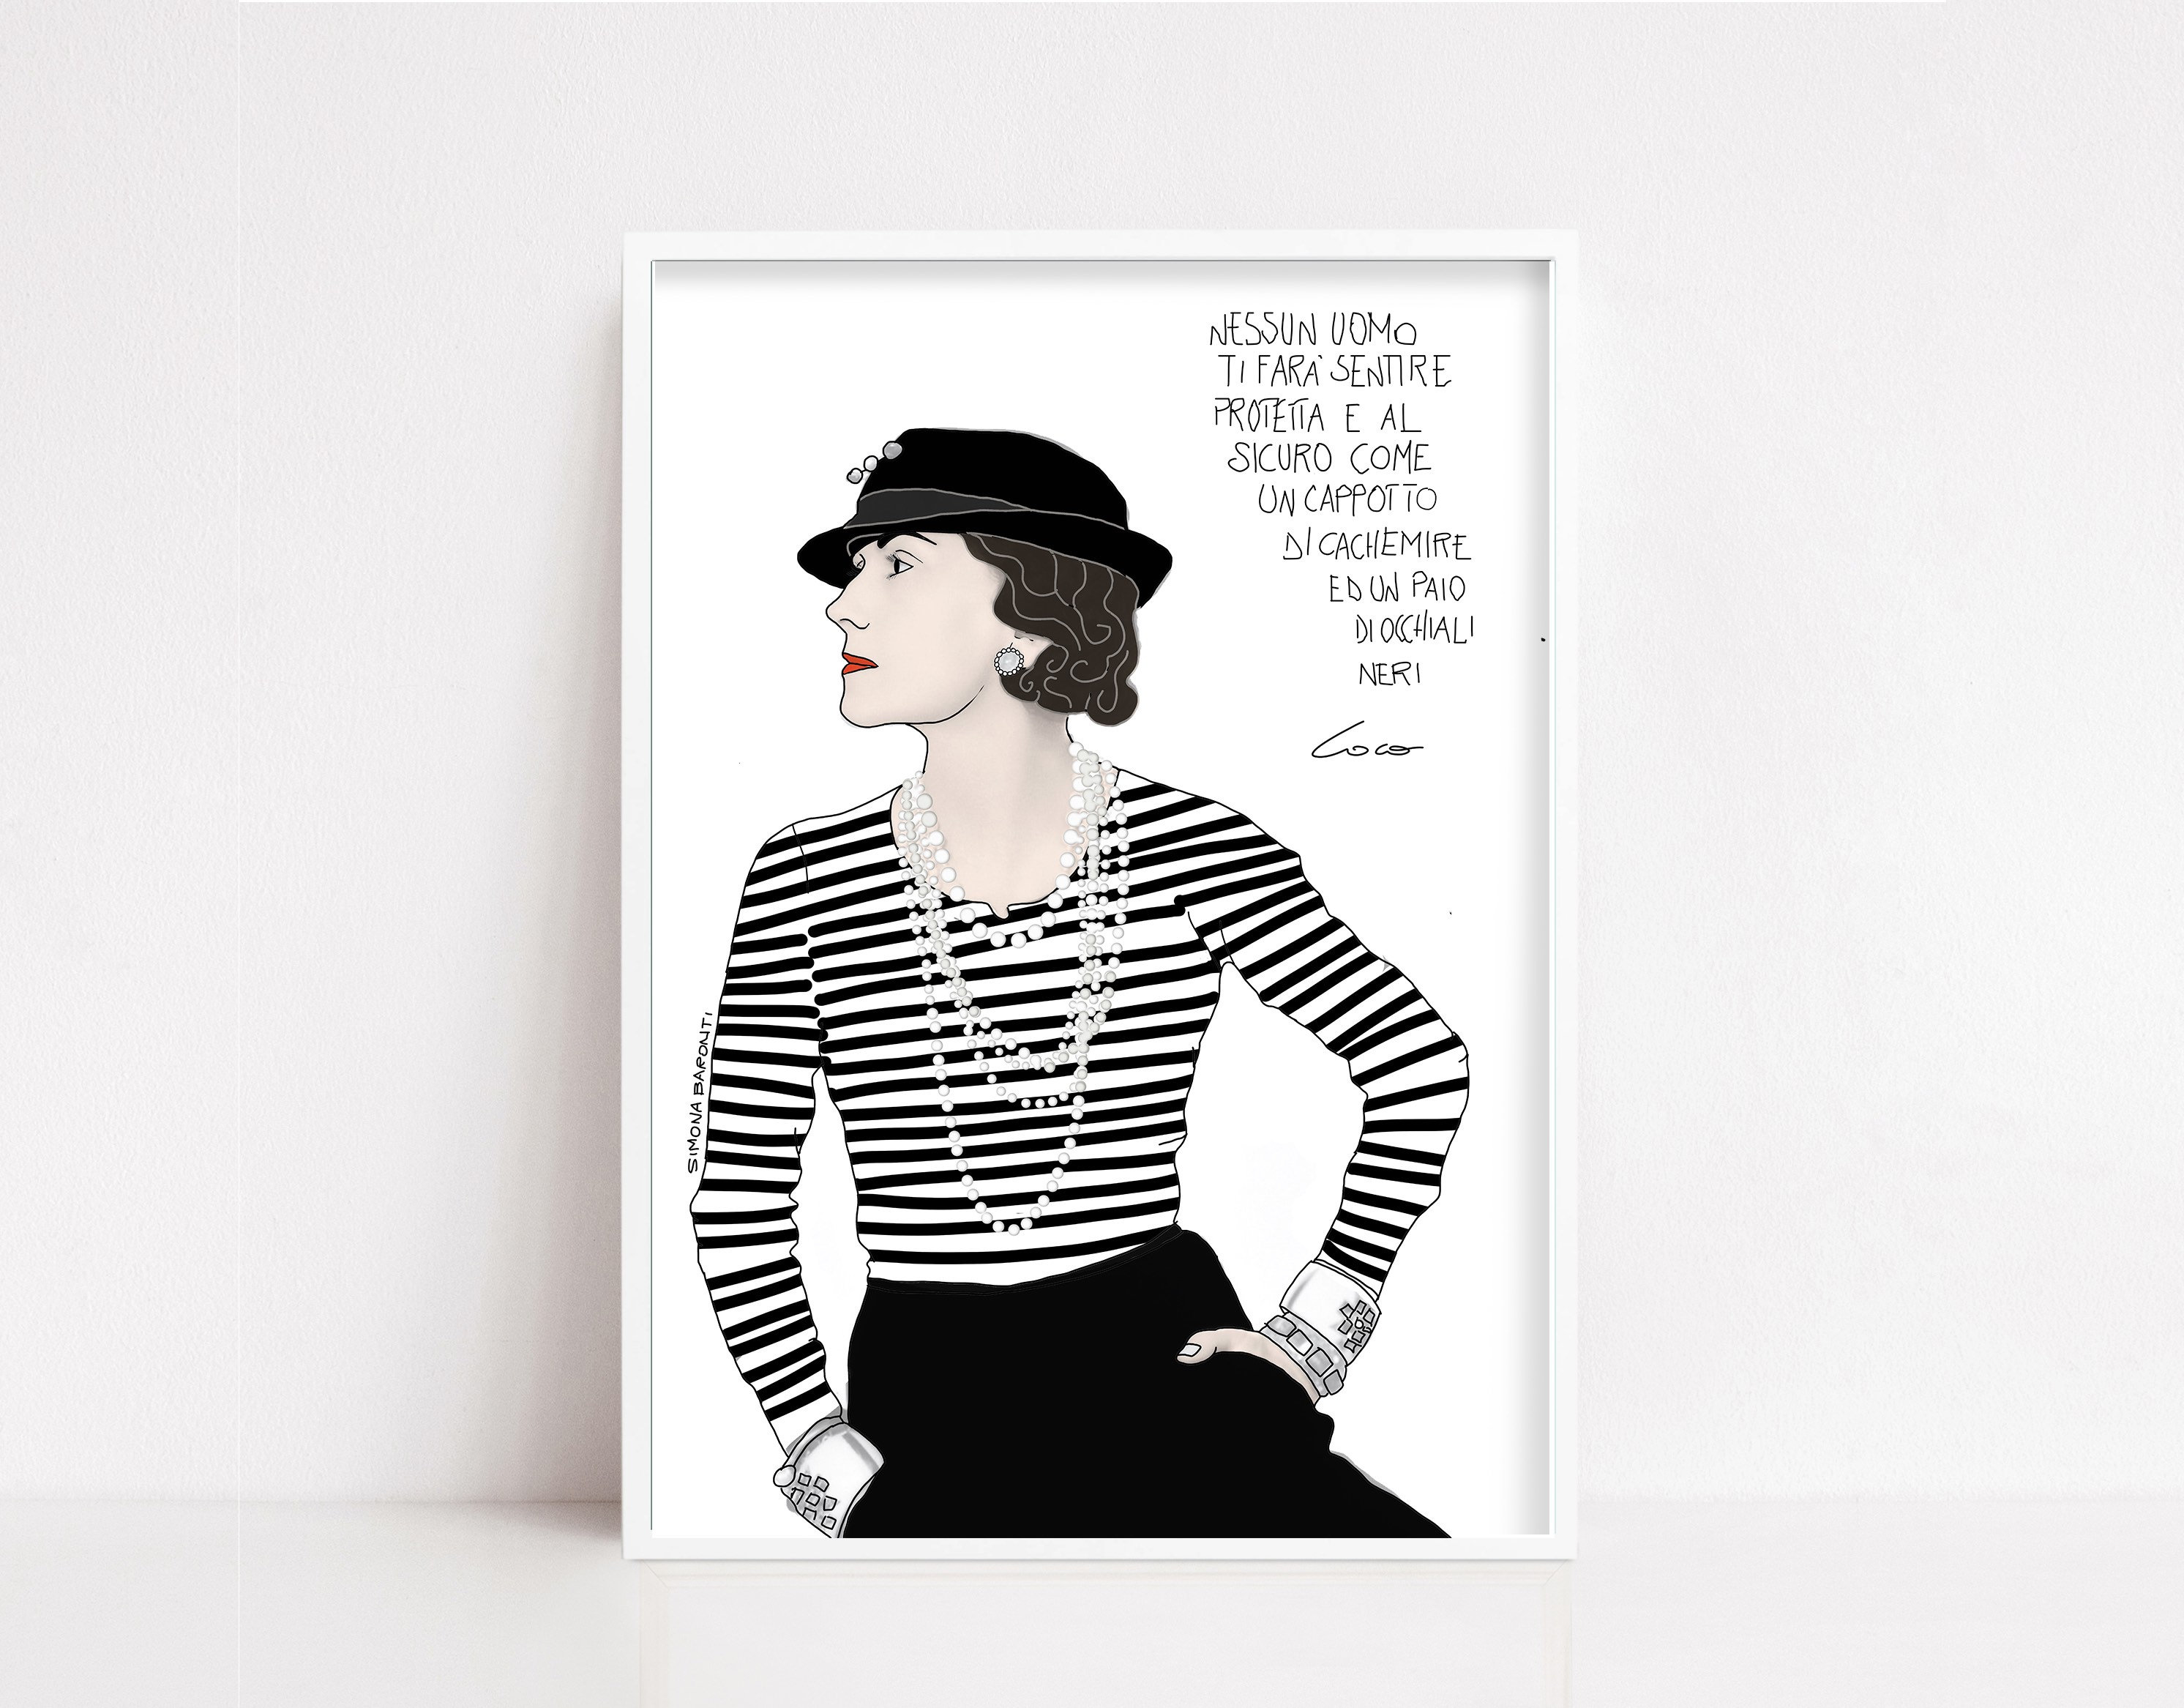 Poster Coco Chanel poster noir et blanc - Posters